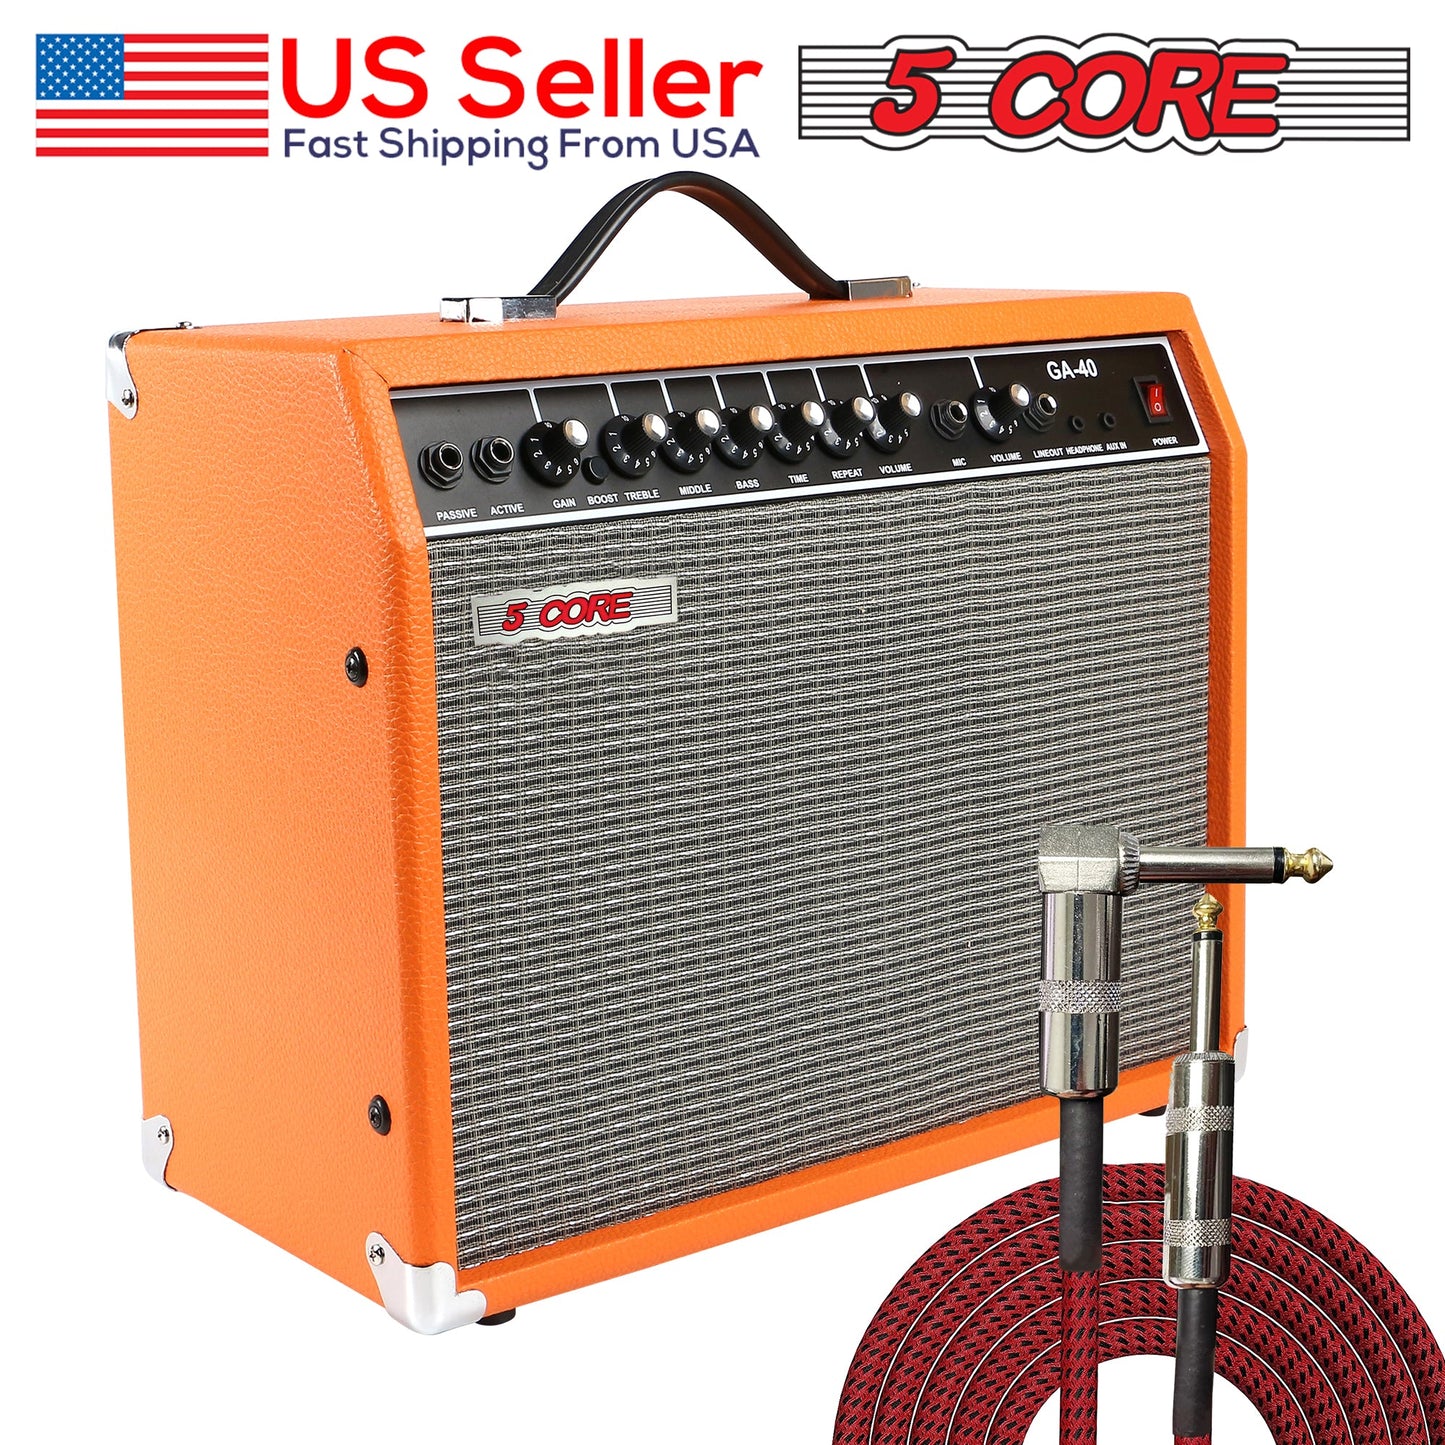 5 Core 40W Guitar Amplifier Orange - Clean and Distortion Channel - Electric Amp with Equalization and AUX Line Input - for Recording Studio, Practice Room, Small Courtyard- GA 40 ORG-1